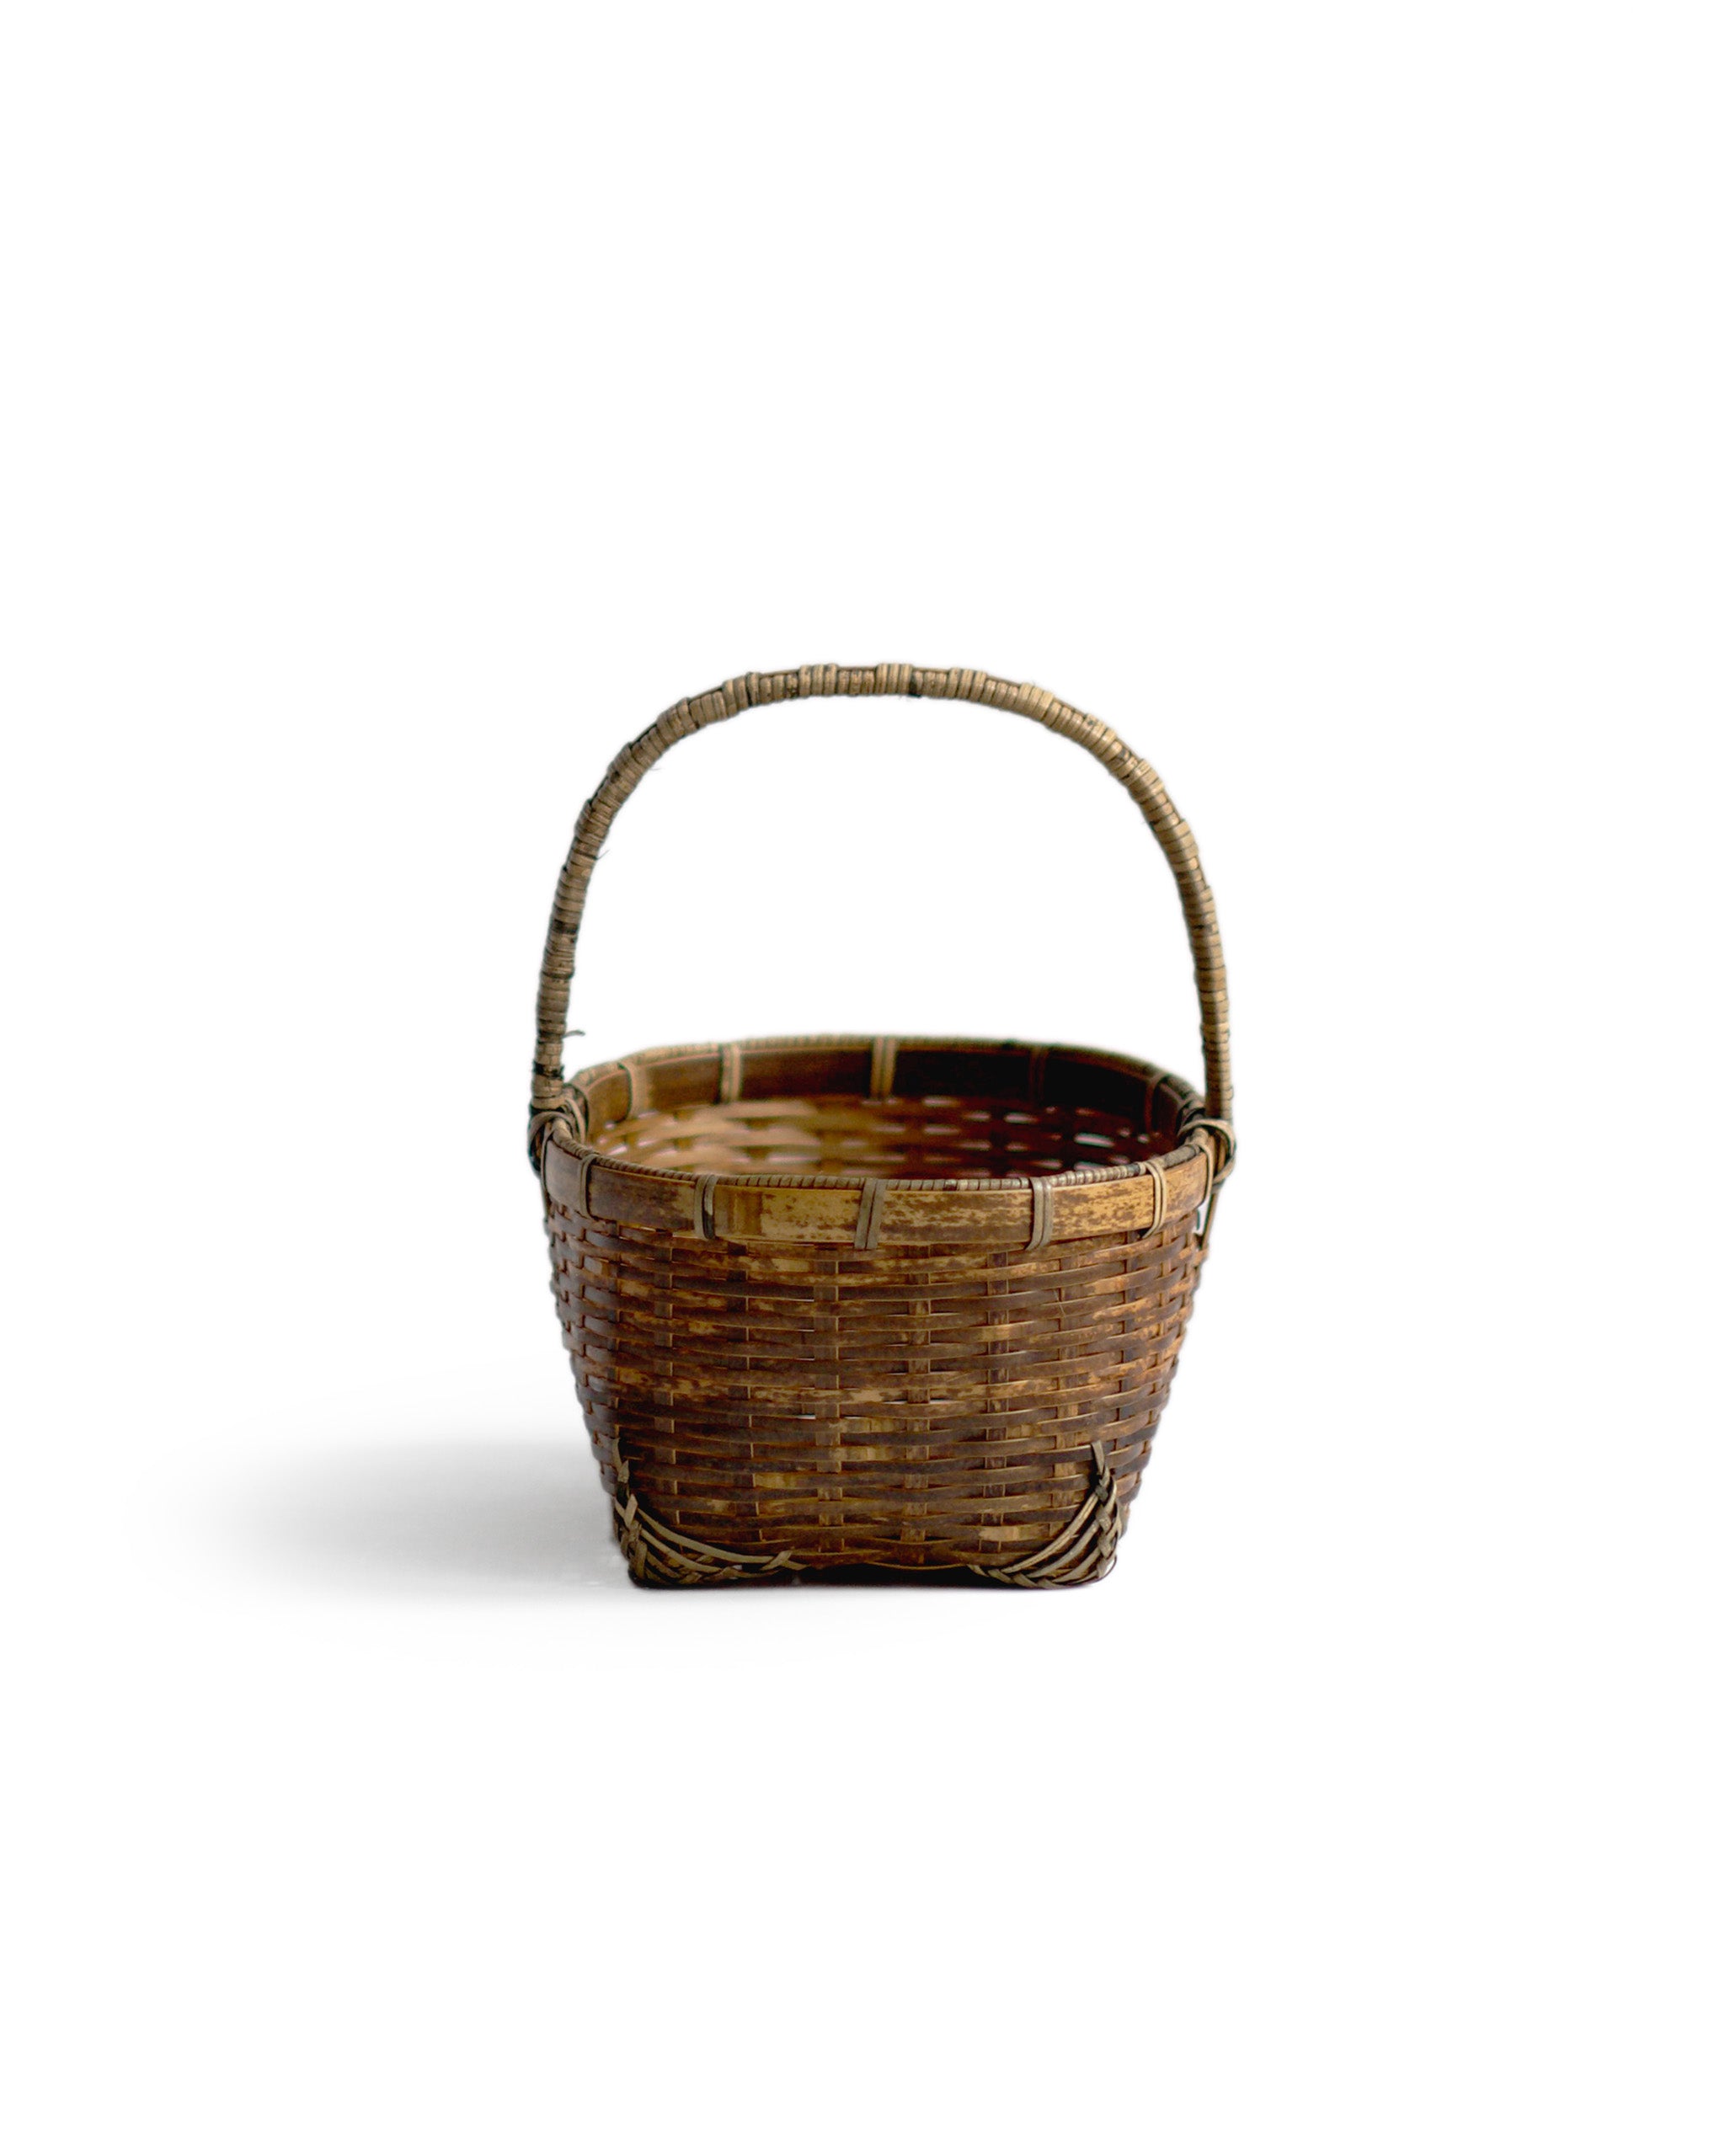 Silhouetted front image of small toradake bread basket with handle by Kohchosai Kosuga against white background.